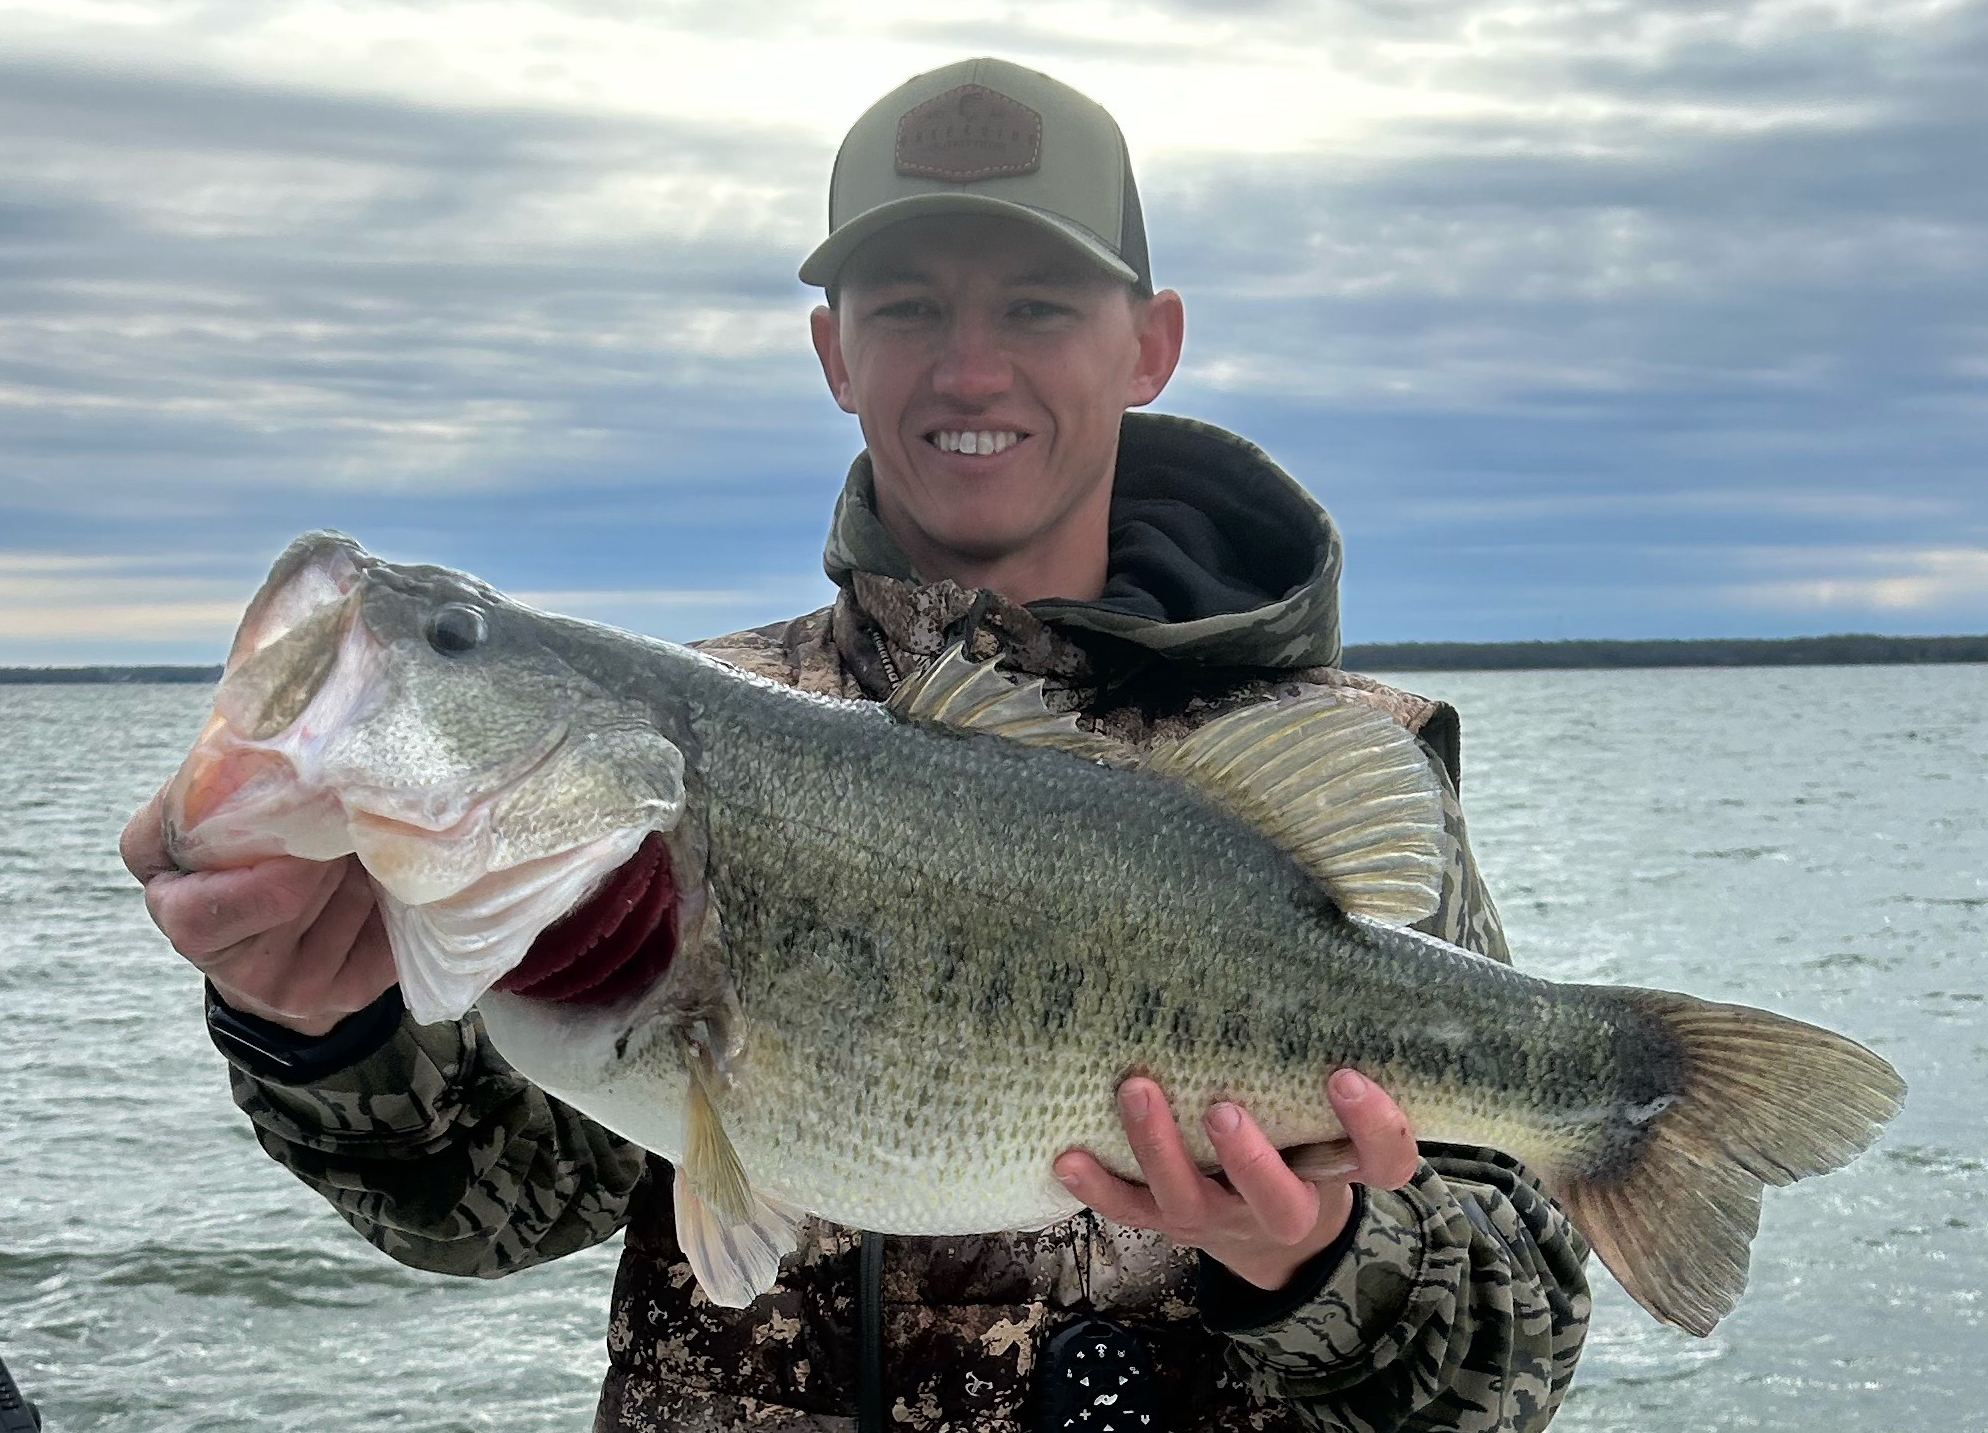 More than a mouthful: Bass guide reels in a surprise catch